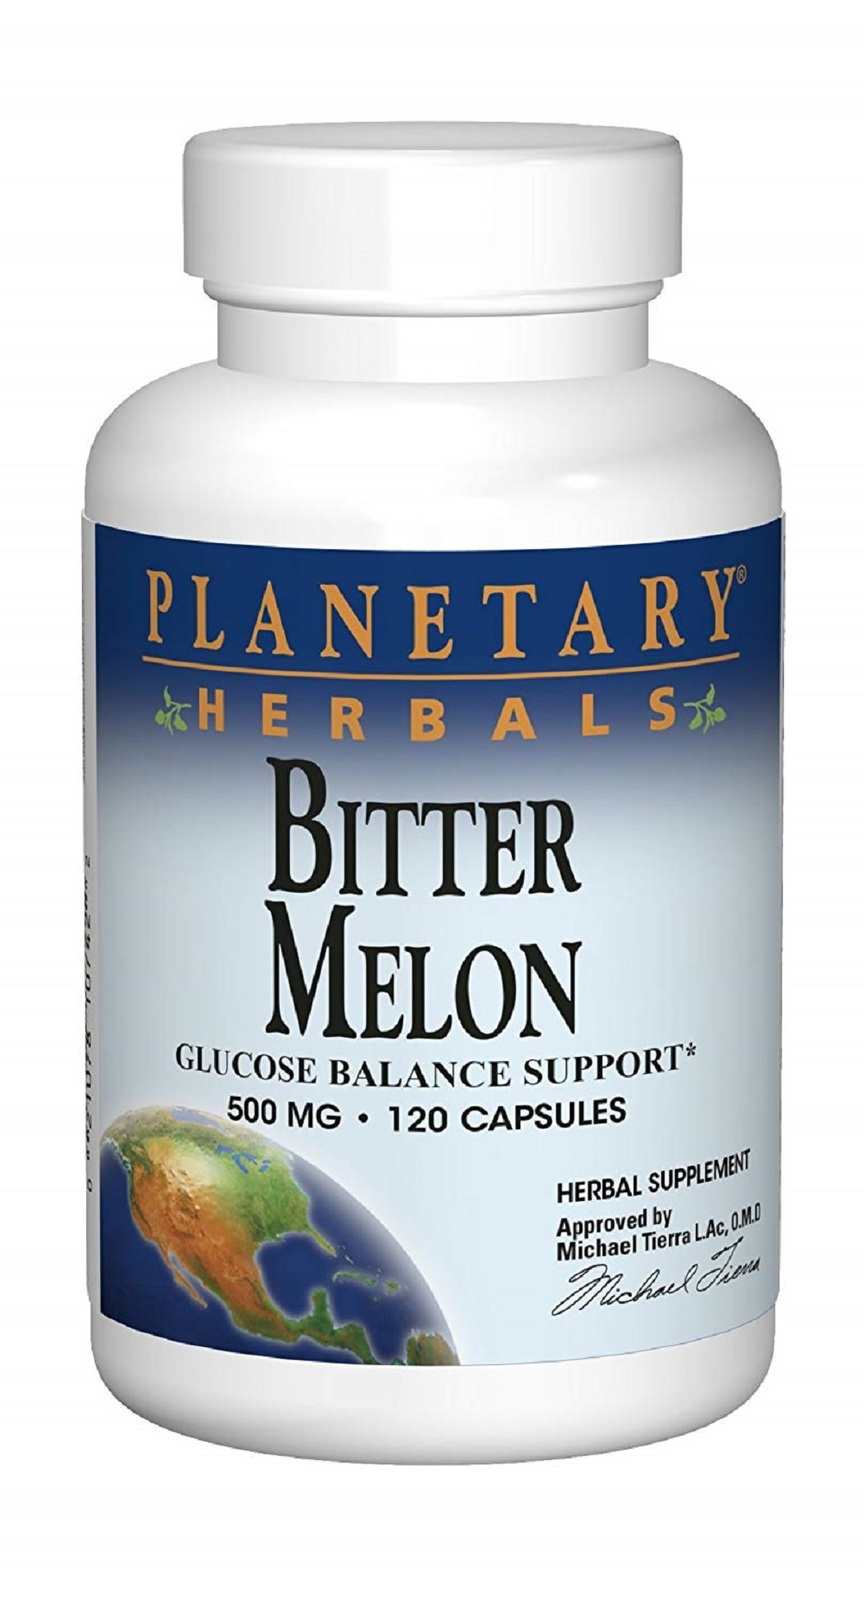 Planetary Herbals Bitter Melon Glucose Balance Support - 120 Caps